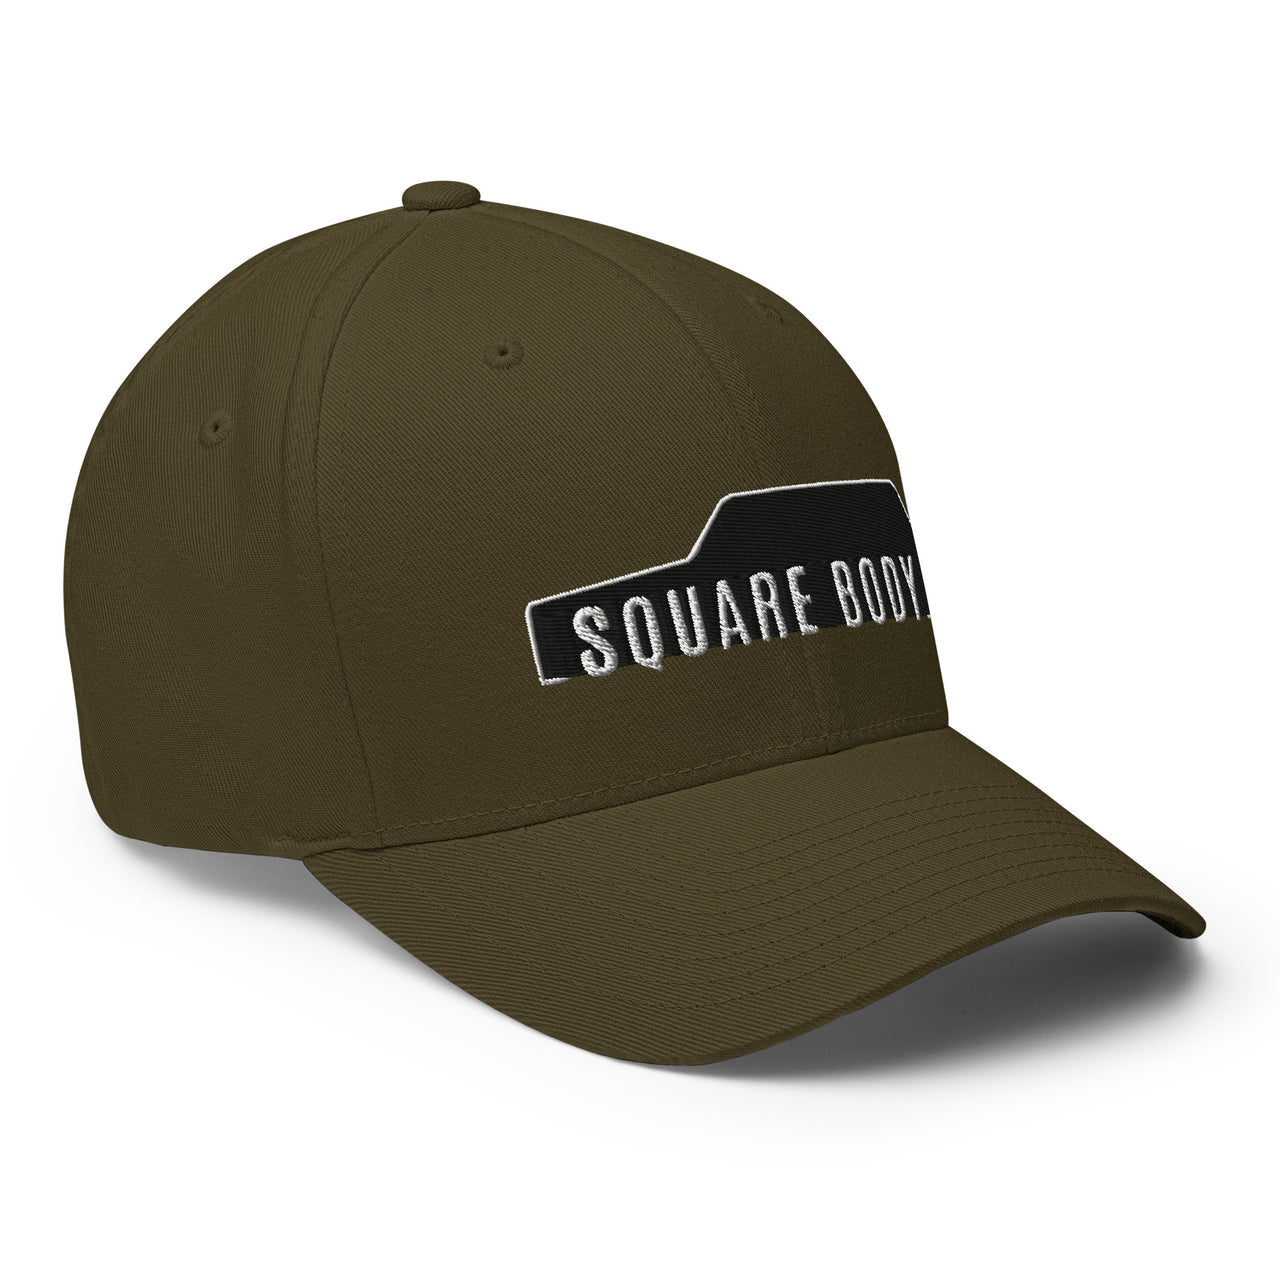 3/4 view of Man wearing a K5 Blazer Square Body Hat From Aggressive Thread in Olive Green